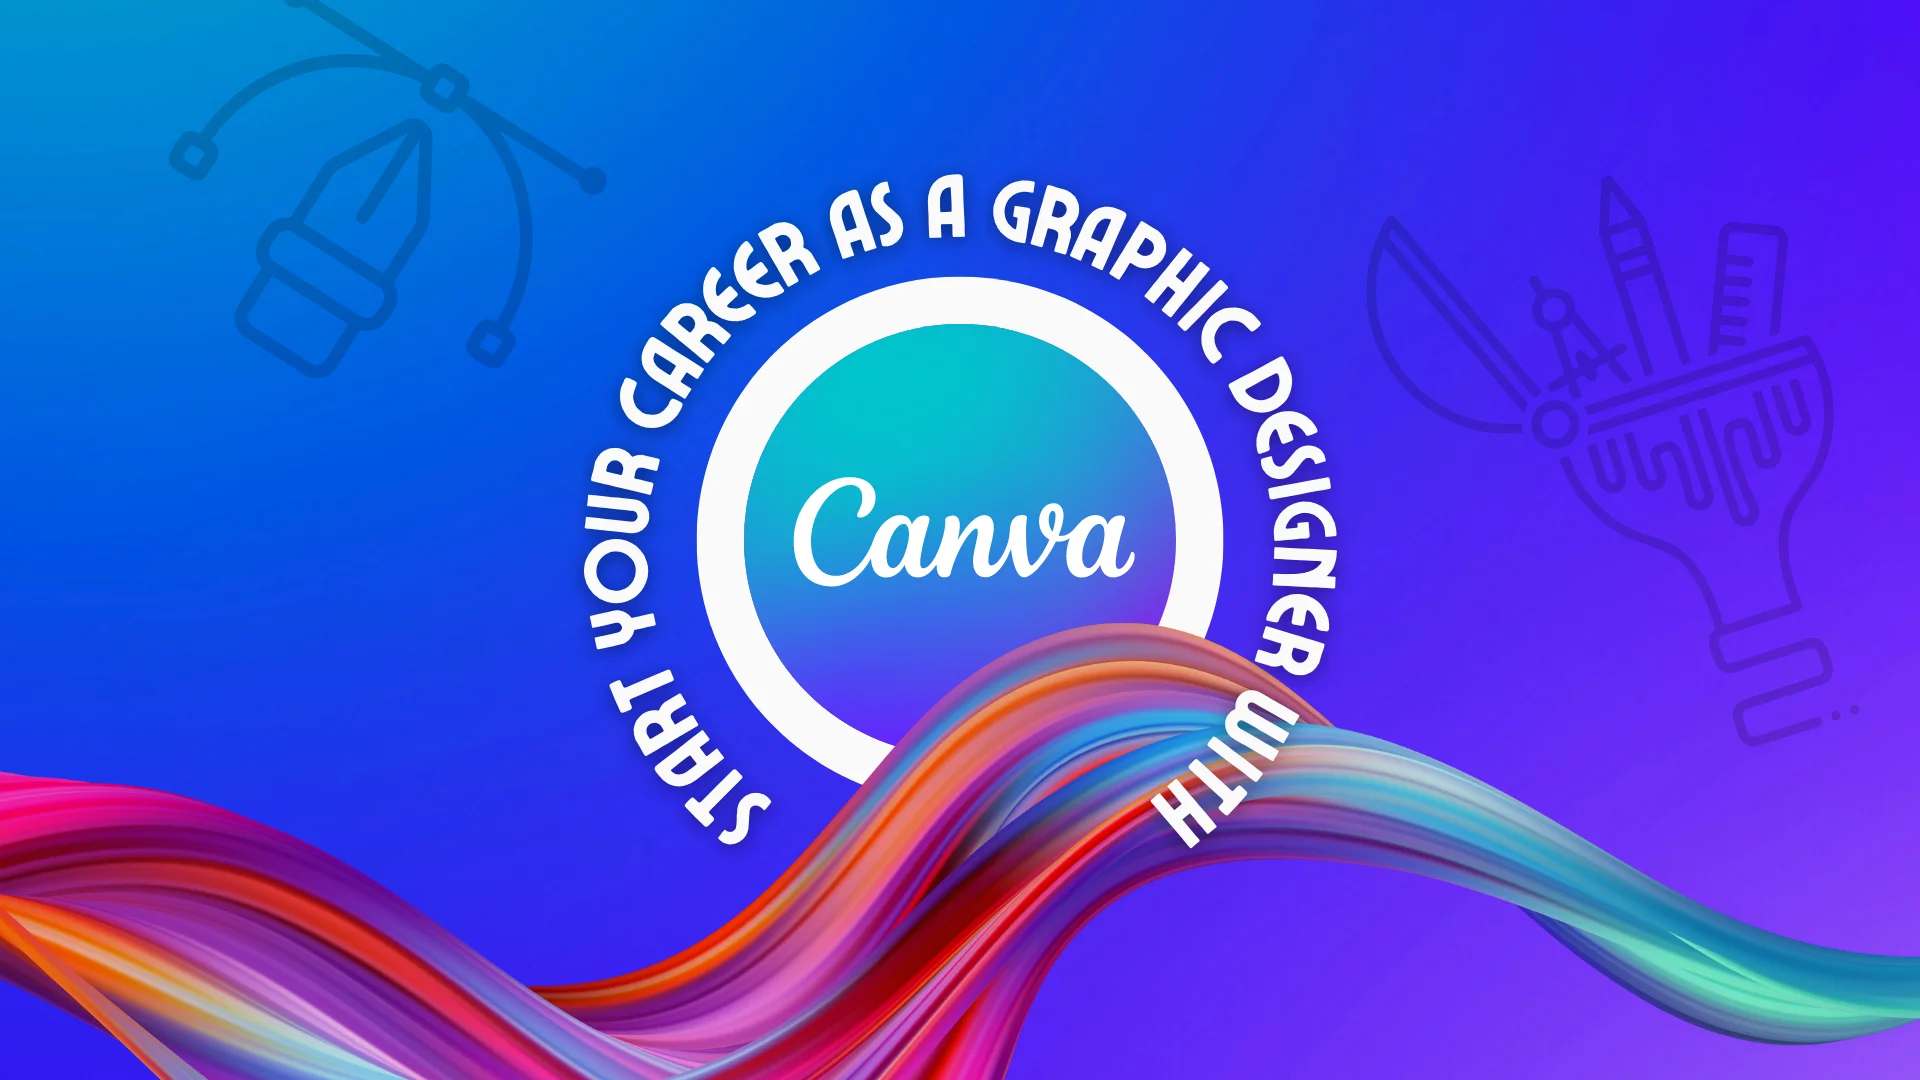 Career with Canva as a Graphic Designer Course Image